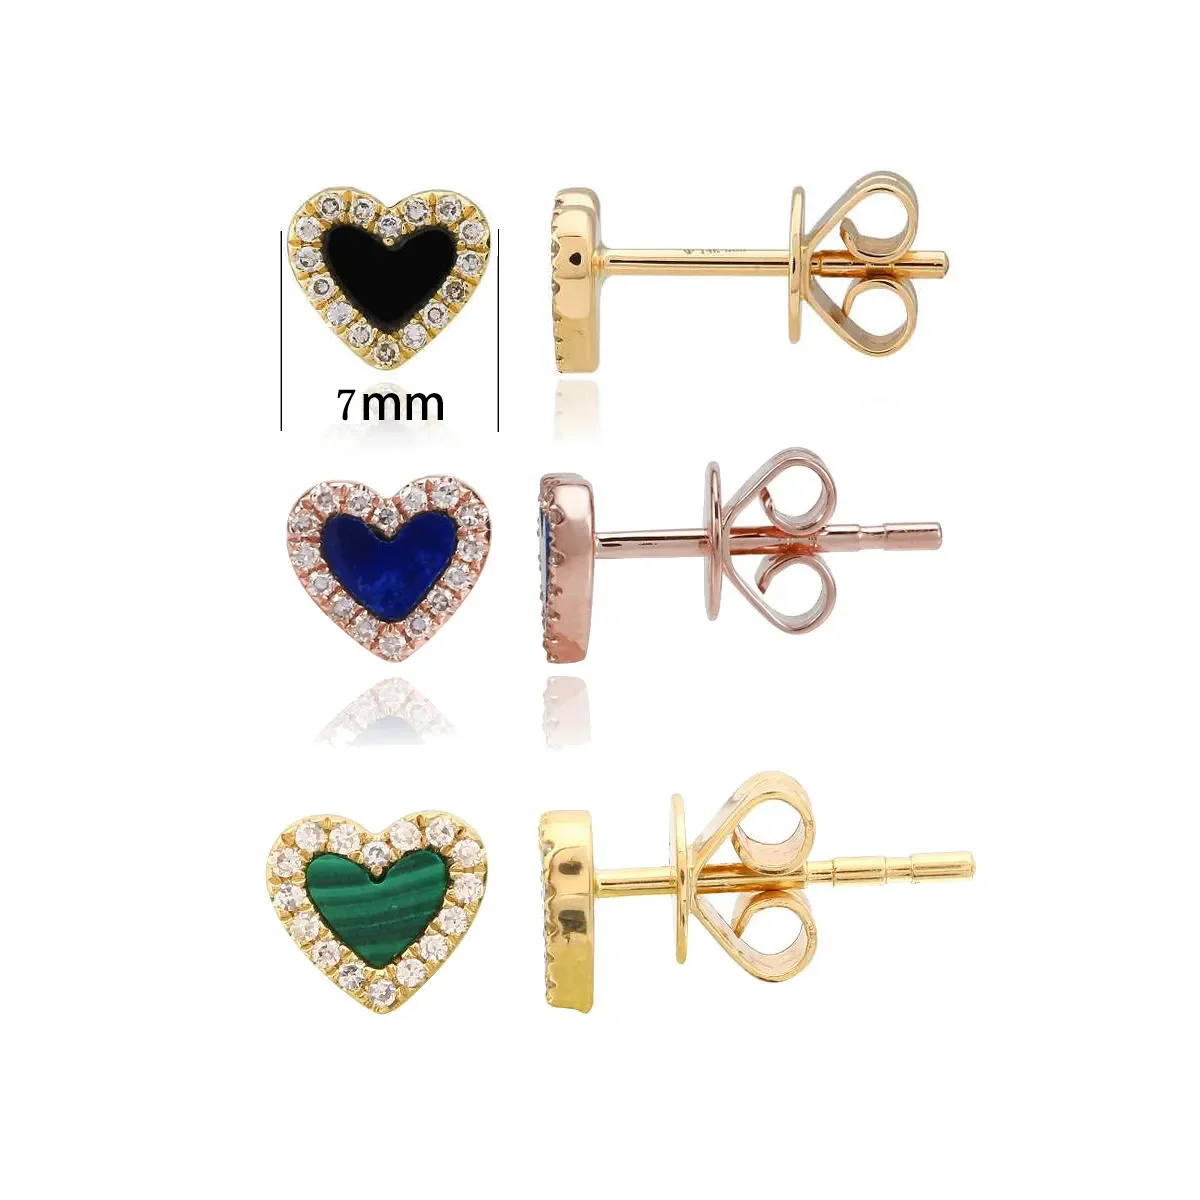 

Slovehoony Gold Plated Pave Outline Stone Heart Stud Earrings 925 Sterling Silver Turquoise Earring For Women